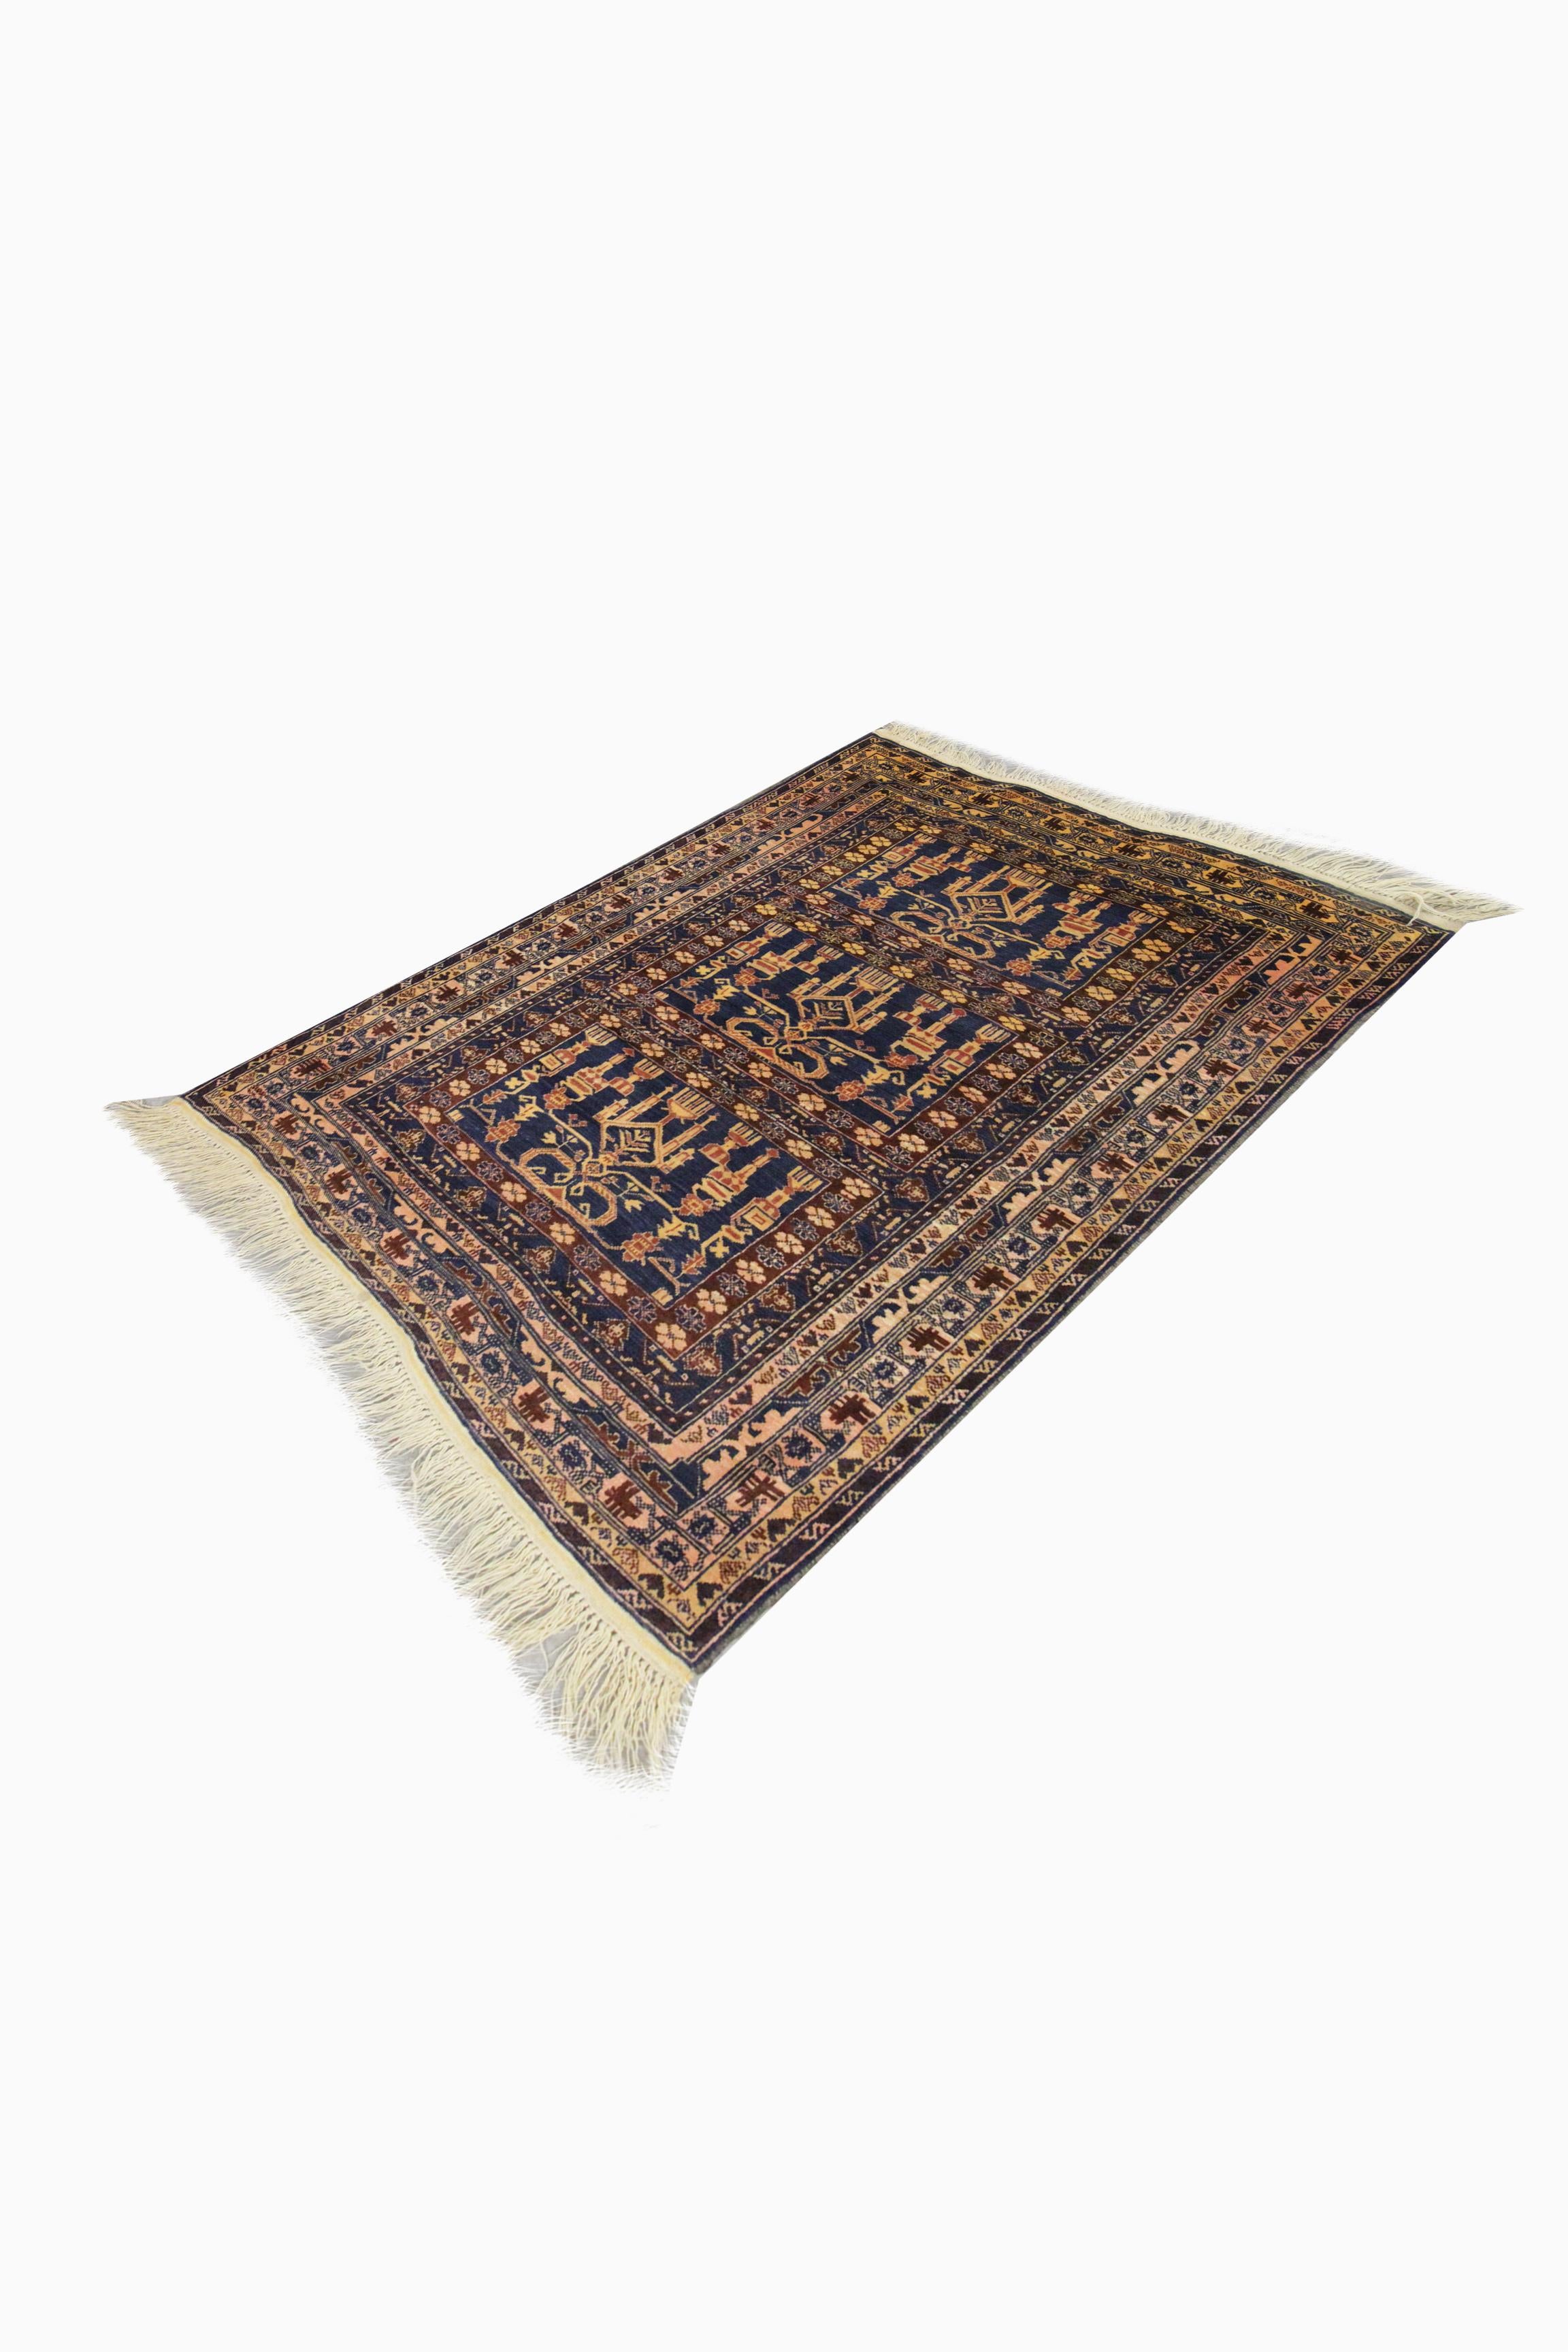 This deep blue wool Baluch area rug is a fine handwoven carpet woven with an intricate traditional design. The central design features a bold symmetrical pattern woven in a trio of rectangular shapes through the centre layered border has been framed